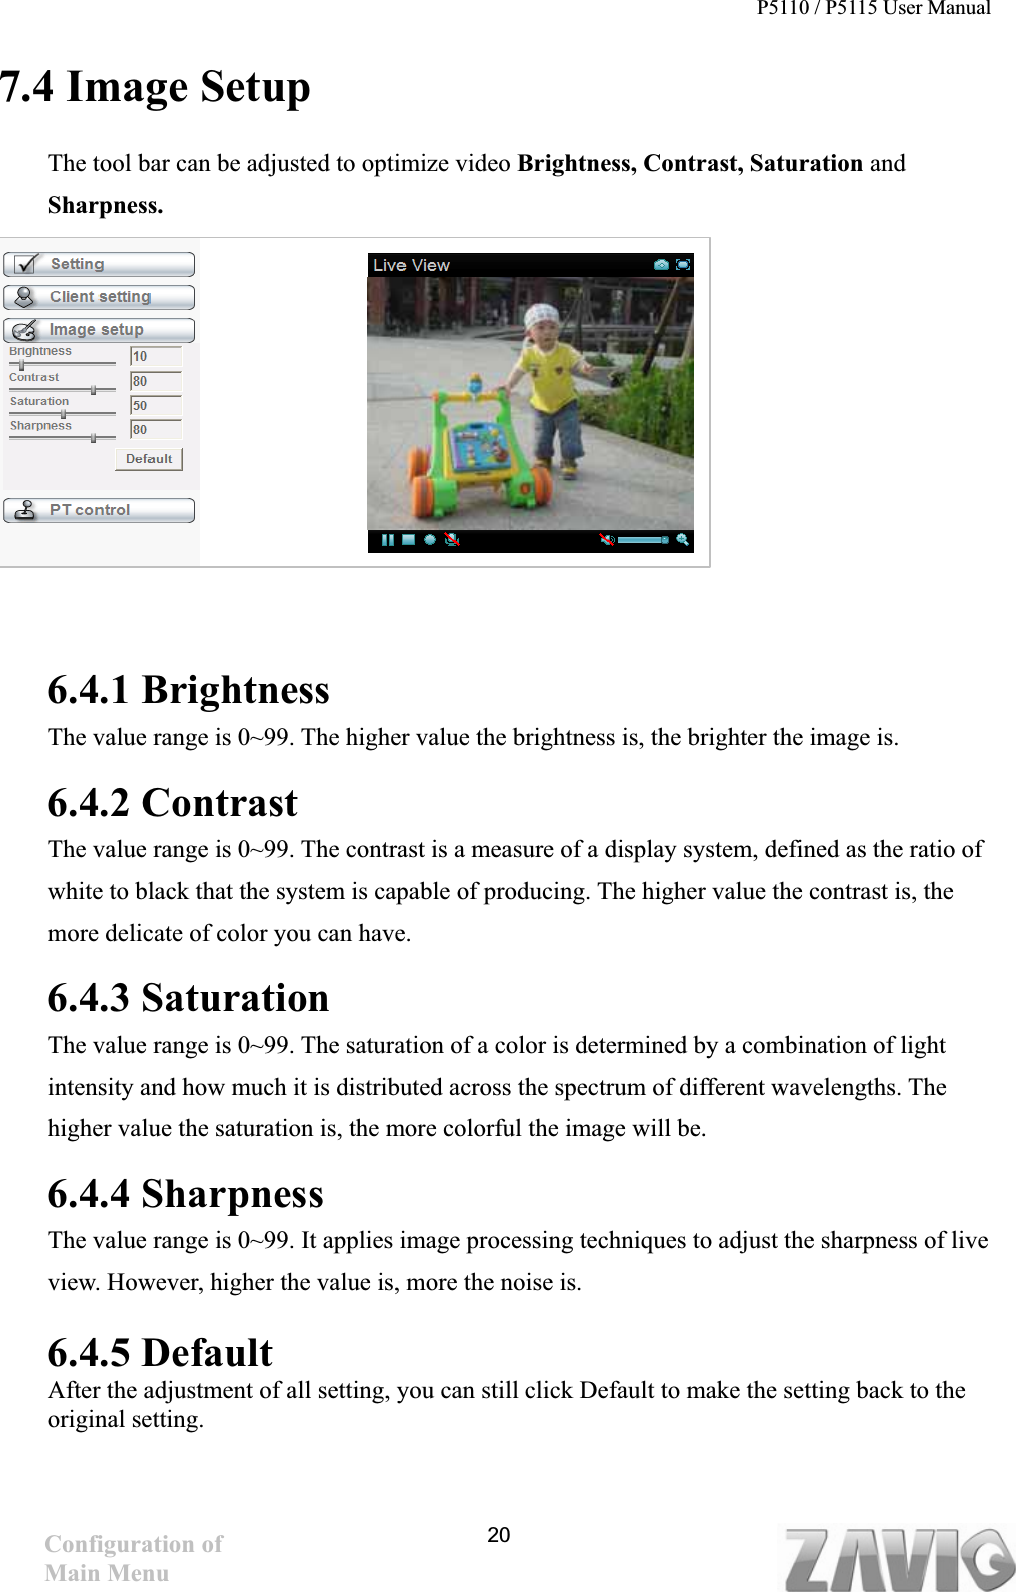 P5110 / P5115 User Manual   207.4 Image Setup The tool bar can be adjusted to optimize video Brightness, Contrast, Saturation andSharpness.  6.4.1 Brightness The value range is 0~99. The higher value the brightness is, the brighter the image is.   6.4.2 Contrast The value range is 0~99. The contrast is a measure of a display system, defined as the ratio of white to black that the system is capable of producing. The higher value the contrast is, the more delicate of color you can have.   6.4.3 Saturation The value range is 0~99. The saturation of a color is determined by a combination of light intensity and how much it is distributed across the spectrum of different wavelengths. The higher value the saturation is, the more colorful the image will be.6.4.4 Sharpness The value range is 0~99. It applies image processing techniques to adjust the sharpness of live view. However, higher the value is, more the noise is. 6.4.5 DefaultAfter the adjustment of all setting, you can still click Default to make the setting back to the original setting. Configuration of Main Menu 